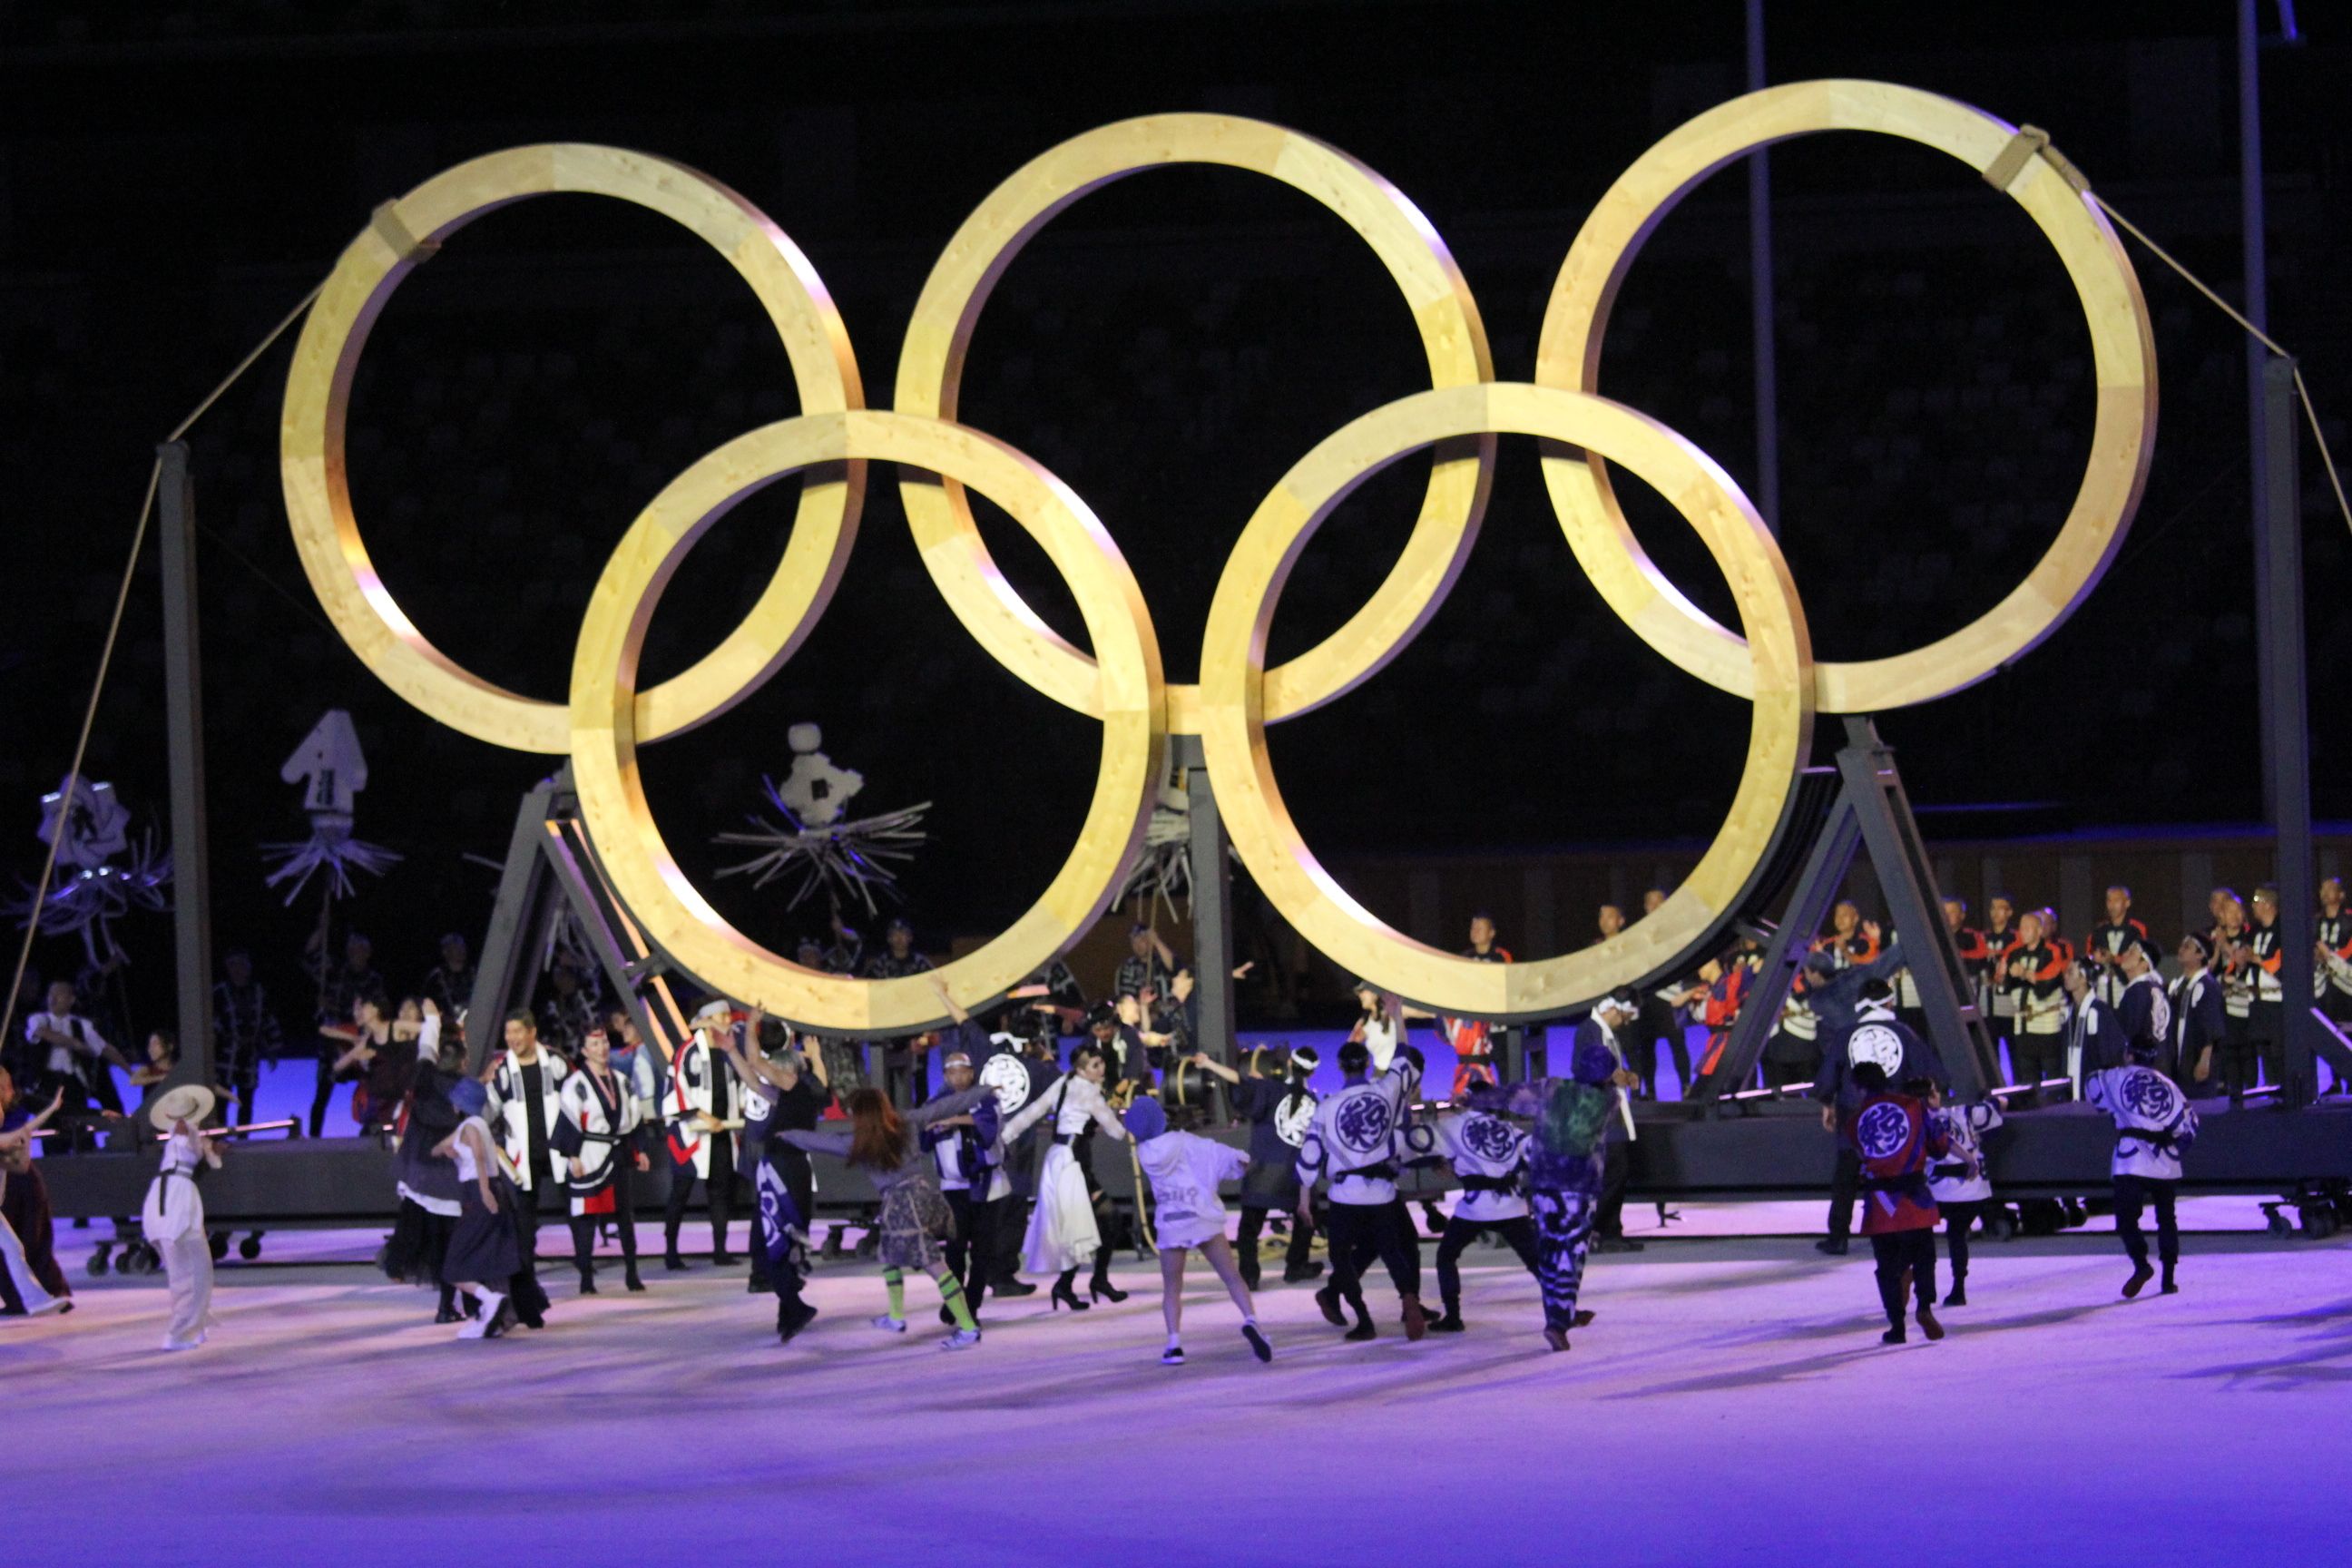 Image of the Olympic rings.